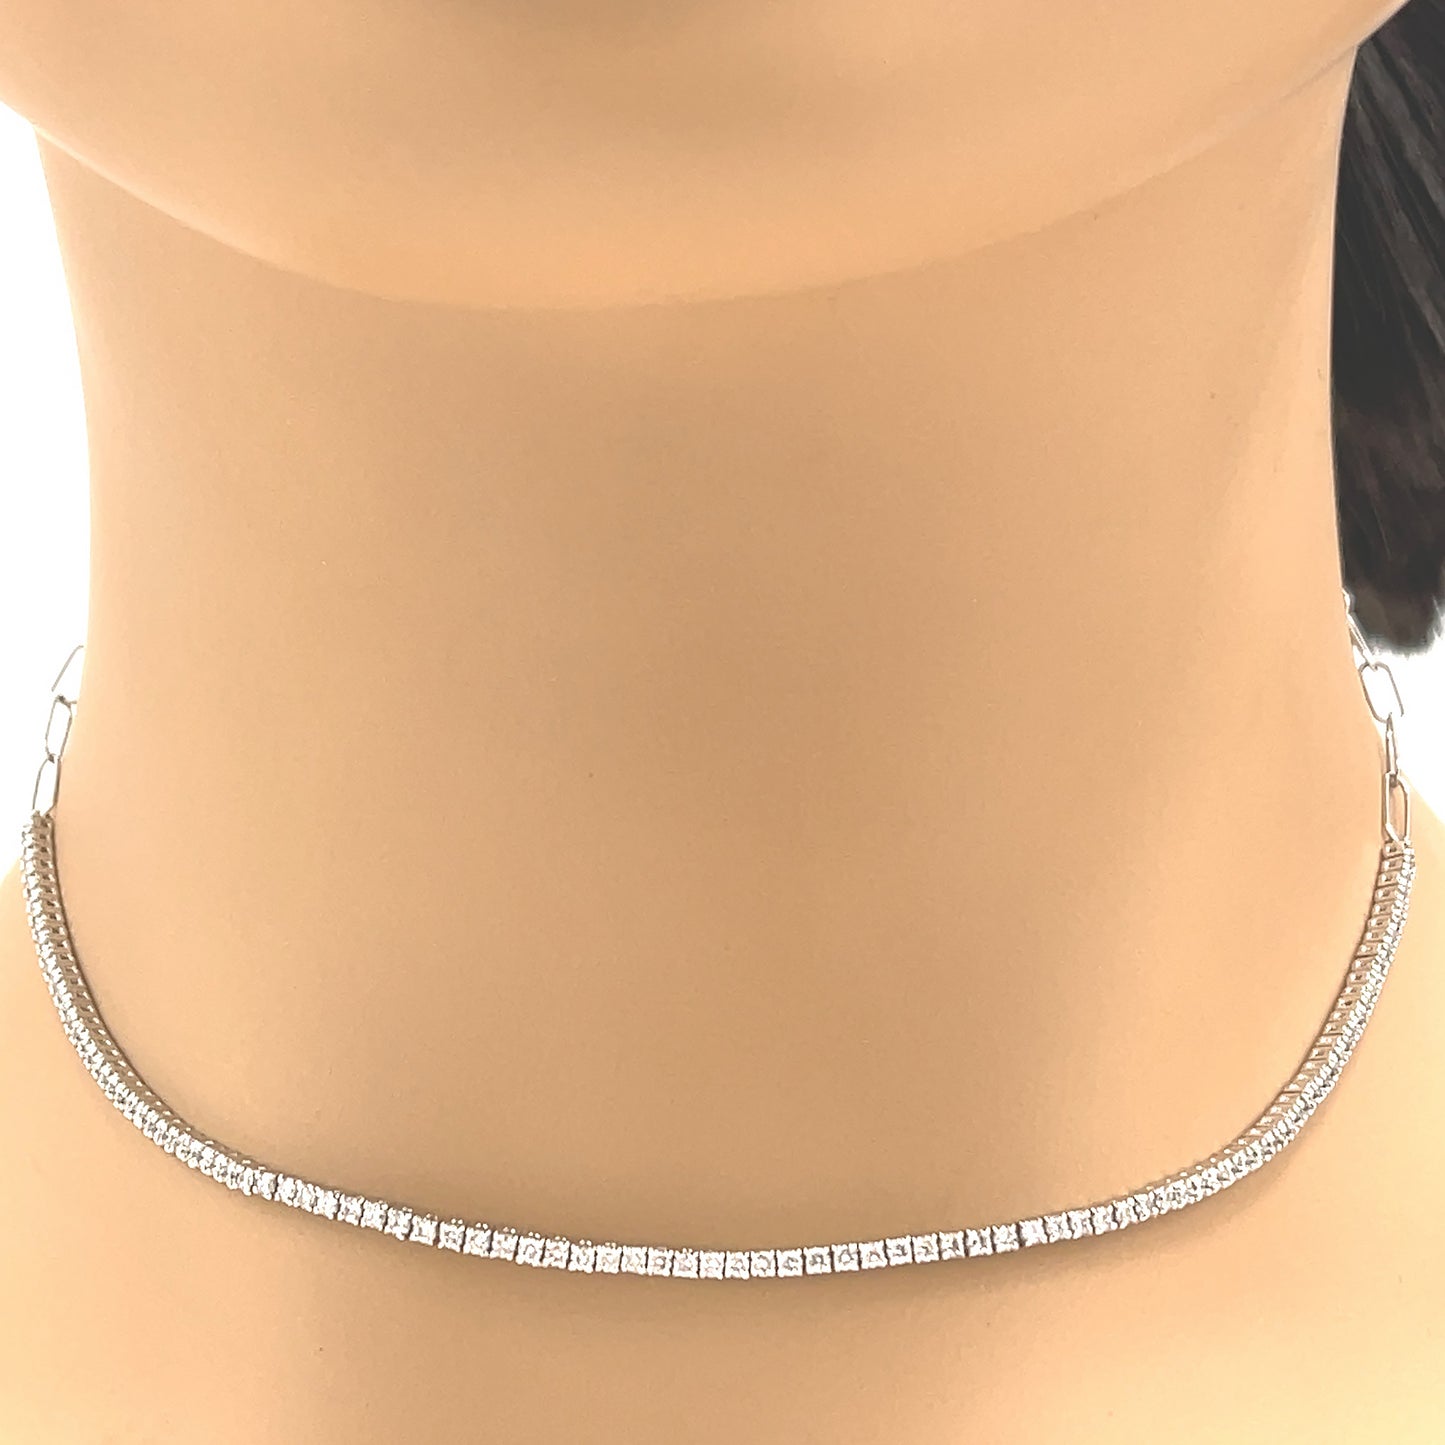 Load image into Gallery viewer, 18 kt White Gold Chain Link Diamond Adjustable Choker Necklace
